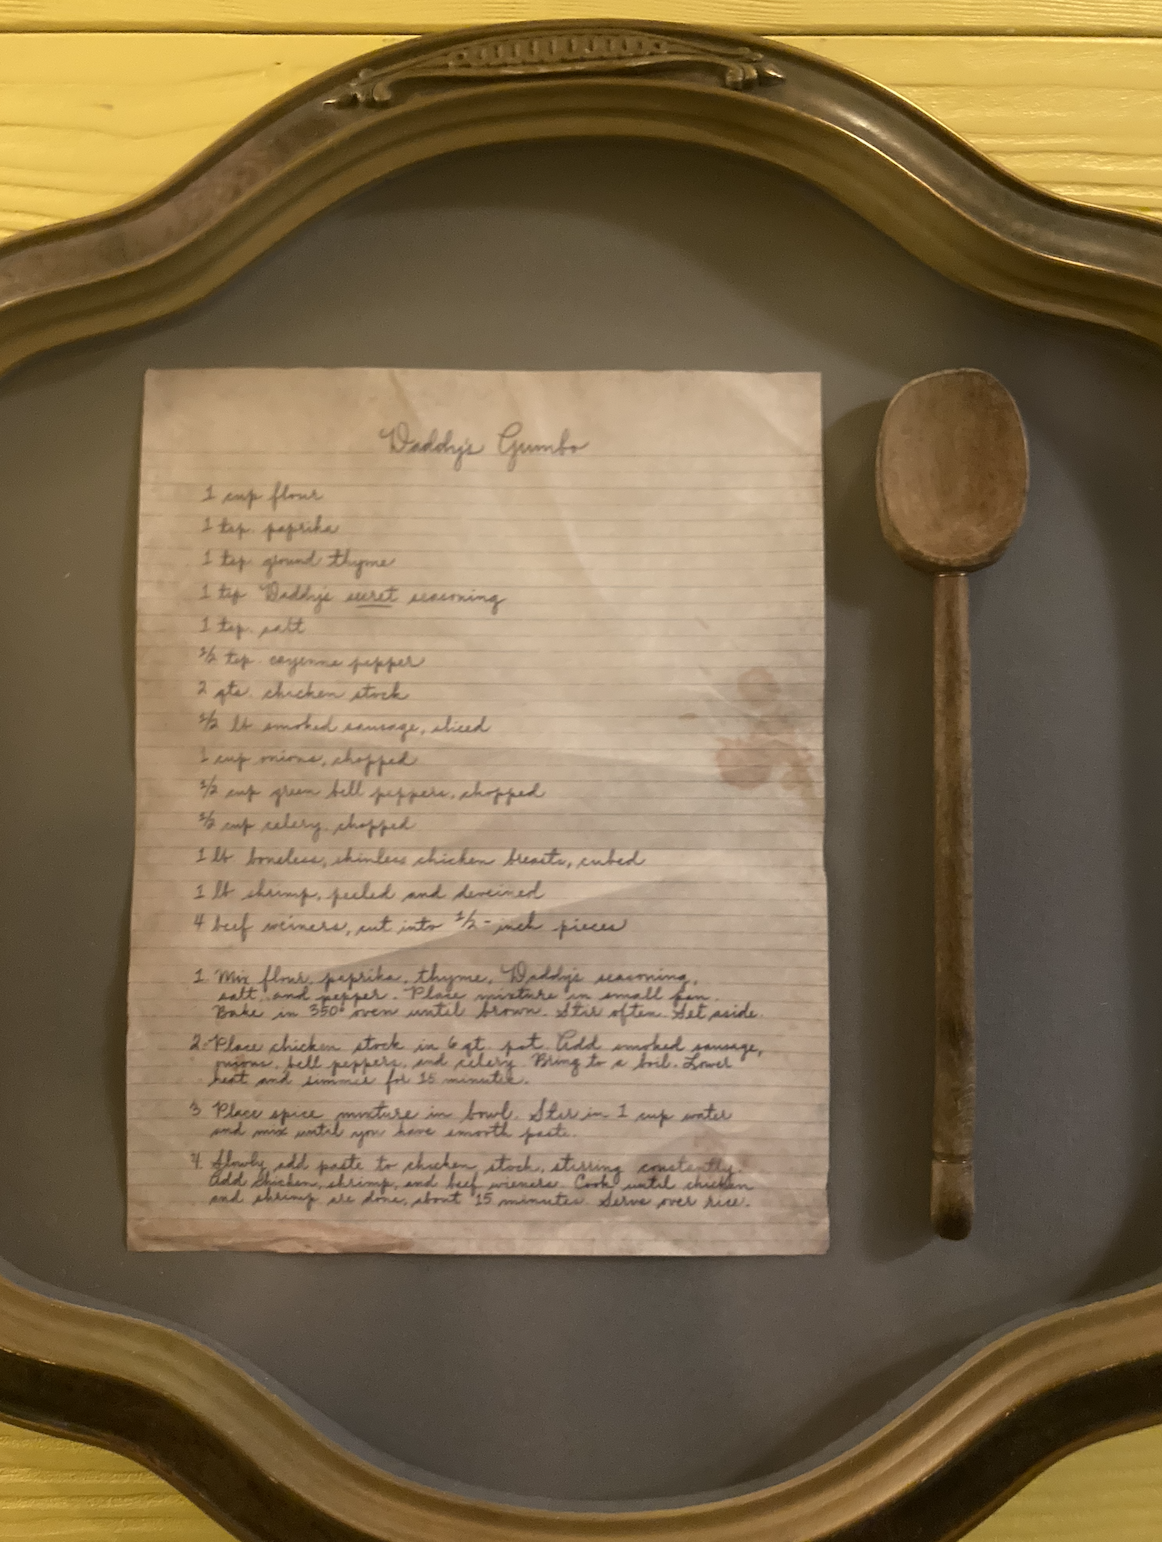 A framed handwritten recipe for &quot;Daddy&#x27;s Gumbo&quot; is displayed next to a wooden spoon. The recipe includes ingredients and cooking instructions